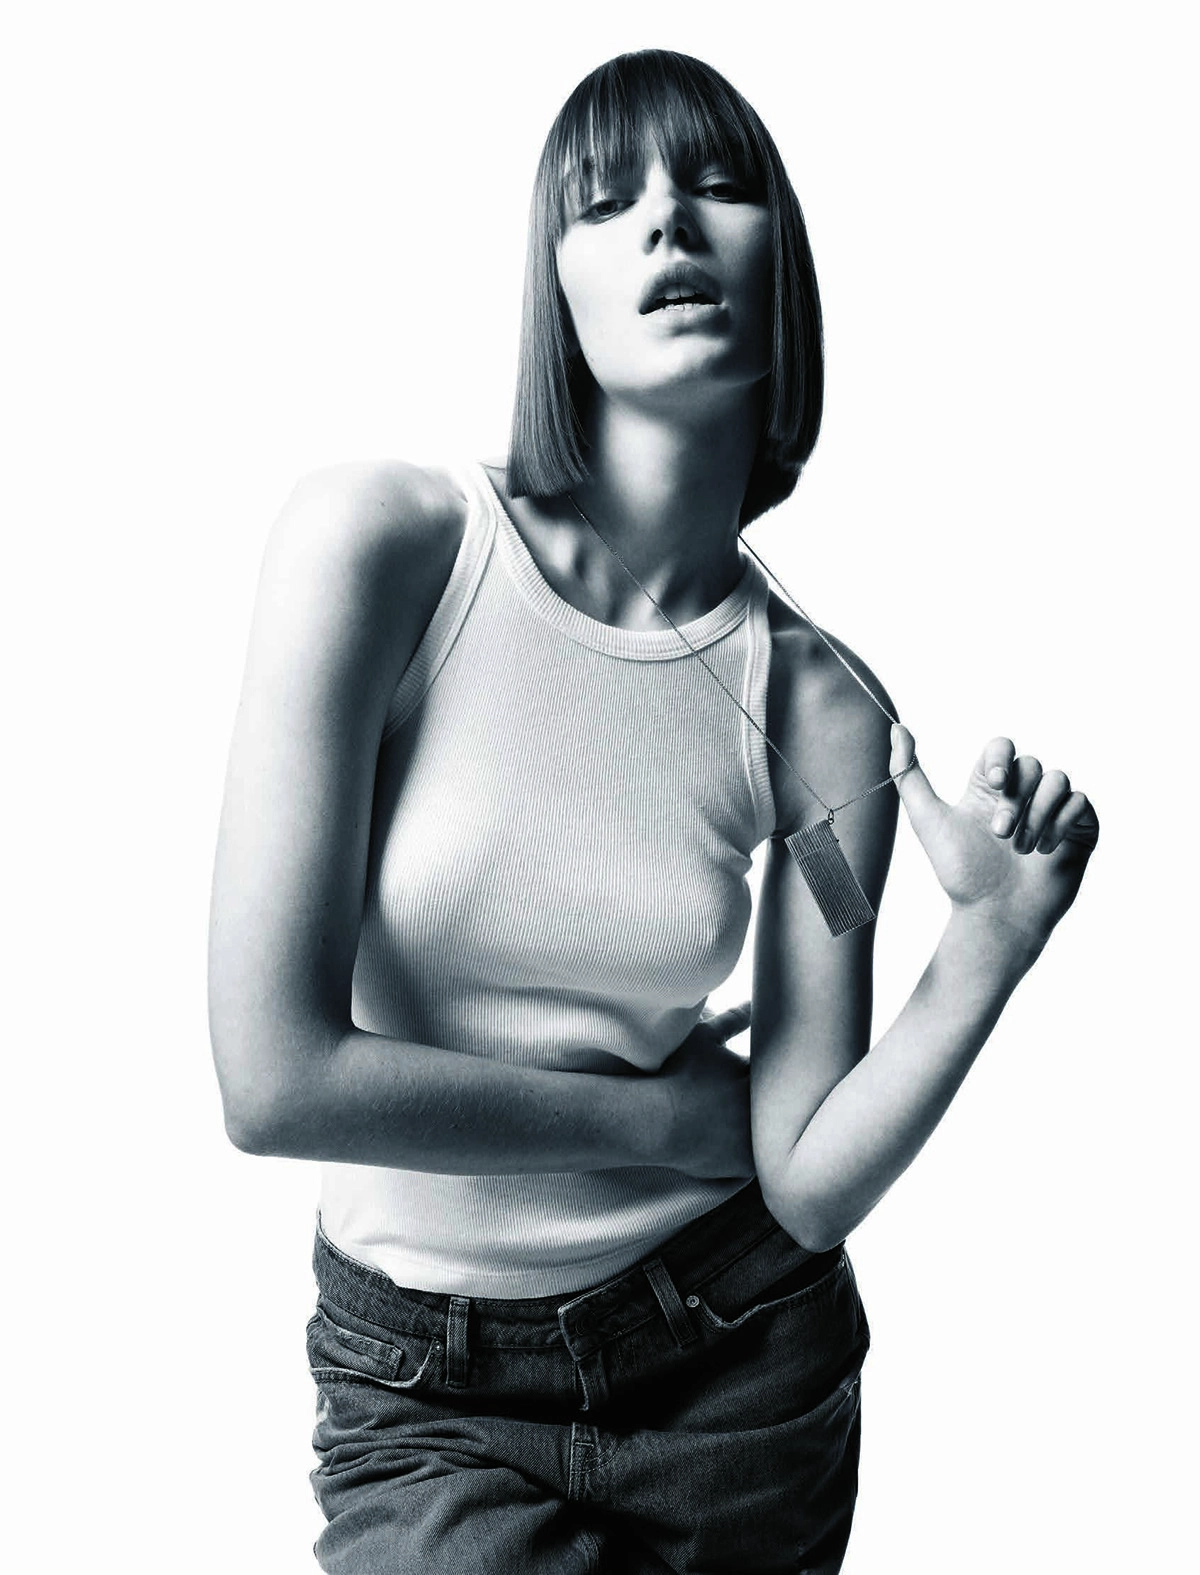 ''Star Tank top'' by Éric Nehr for Madame Figaro September 23rd, 2022